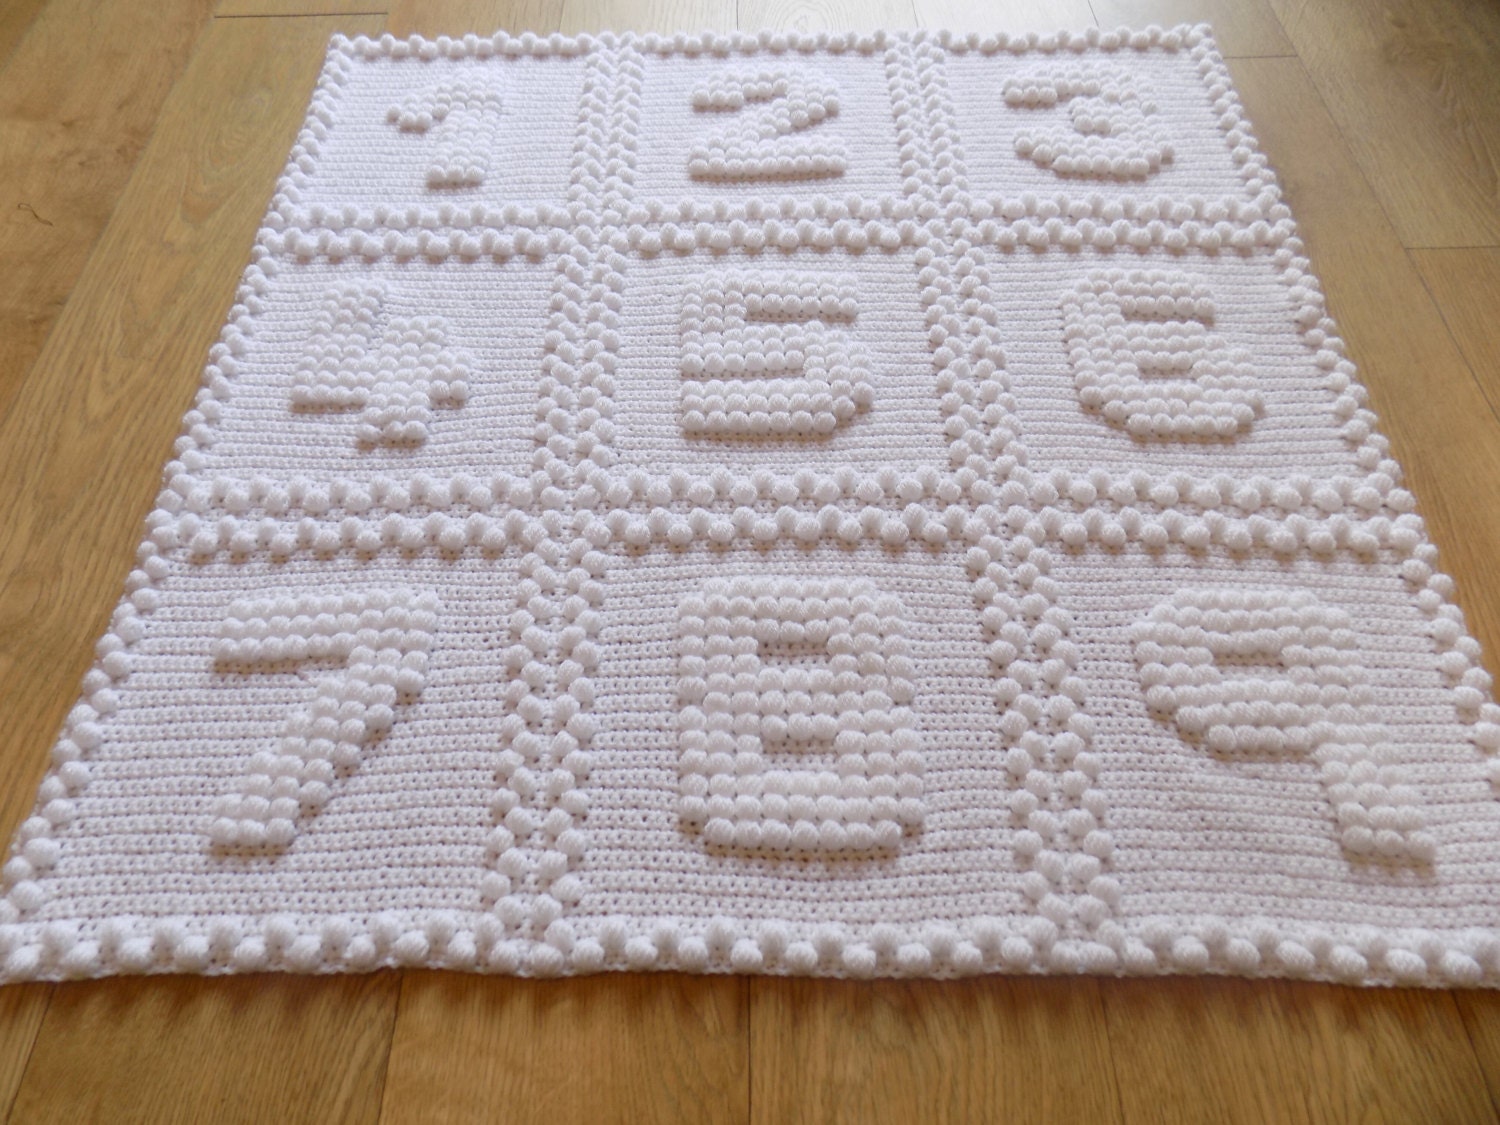 Numbers One Piece Baby Blanket Crochet PATTERN by